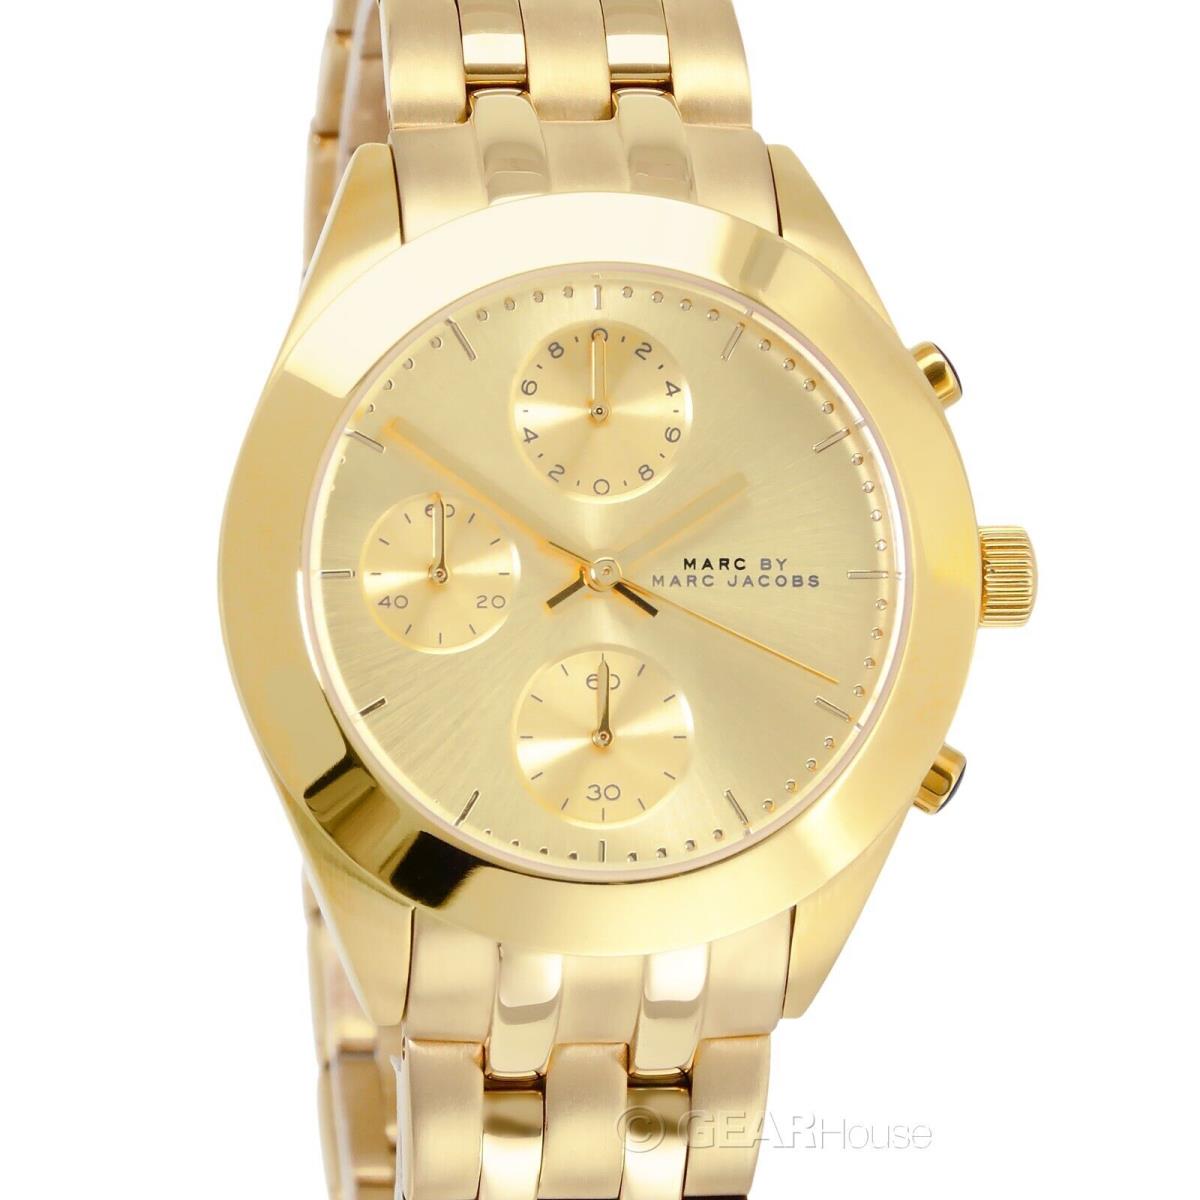 Marc by Marc Jacobs Womens Peeker Chronograph Watch Gold Dial Stainless Steel